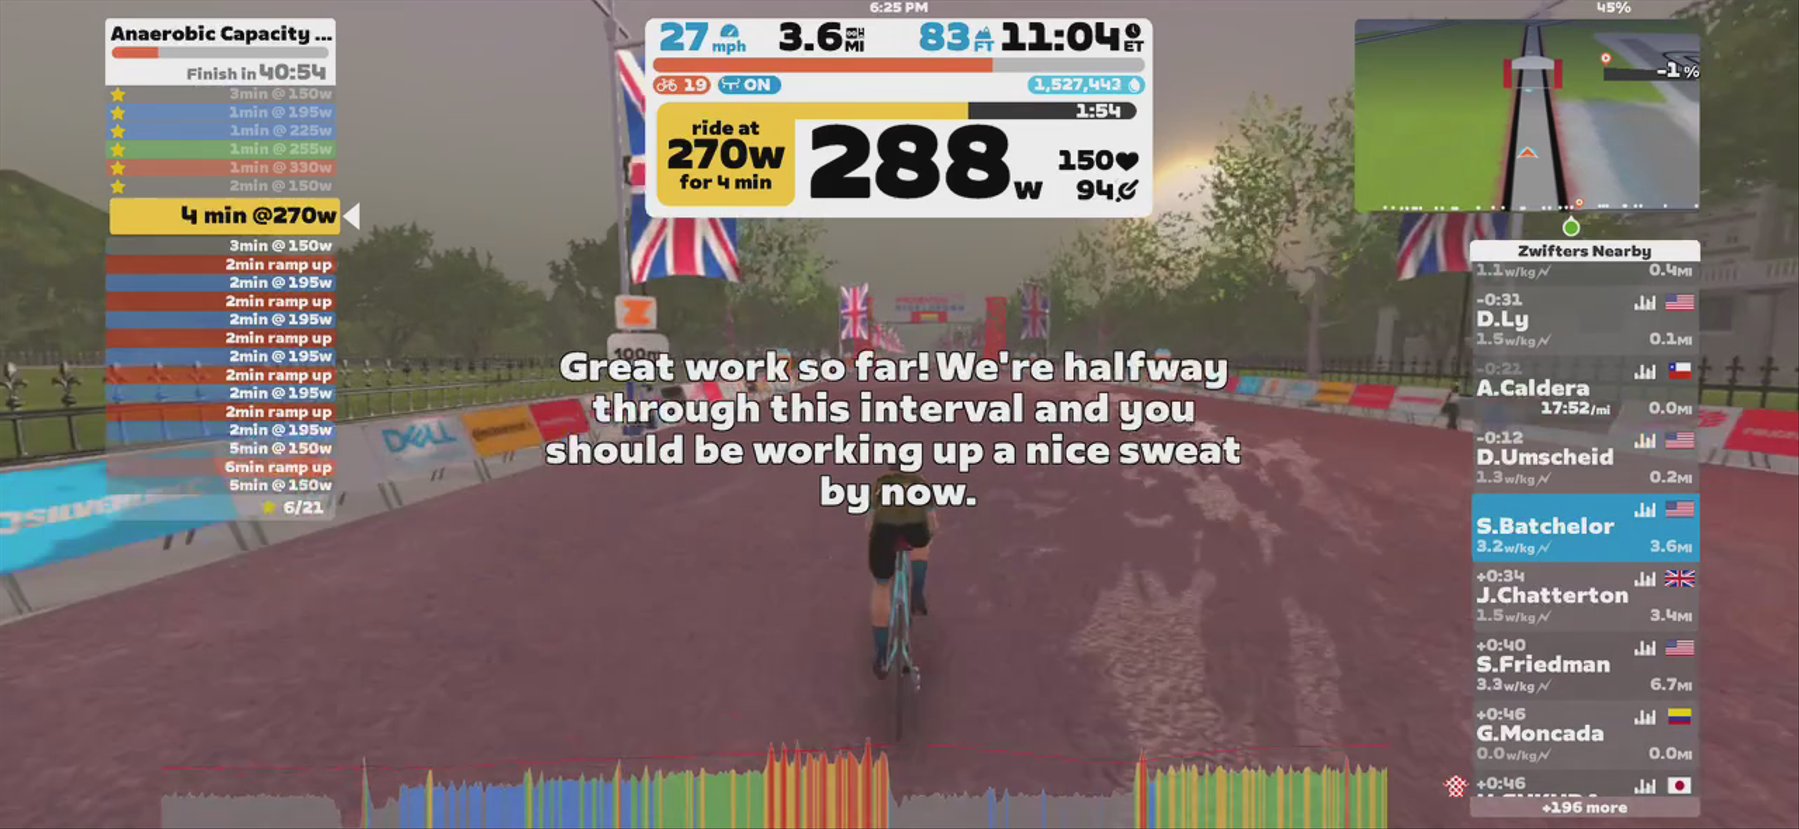 Zwift - Zwift Academy 2019 Semi-Finals Workout #1: Anaerobic Capacity Into VO2 in London